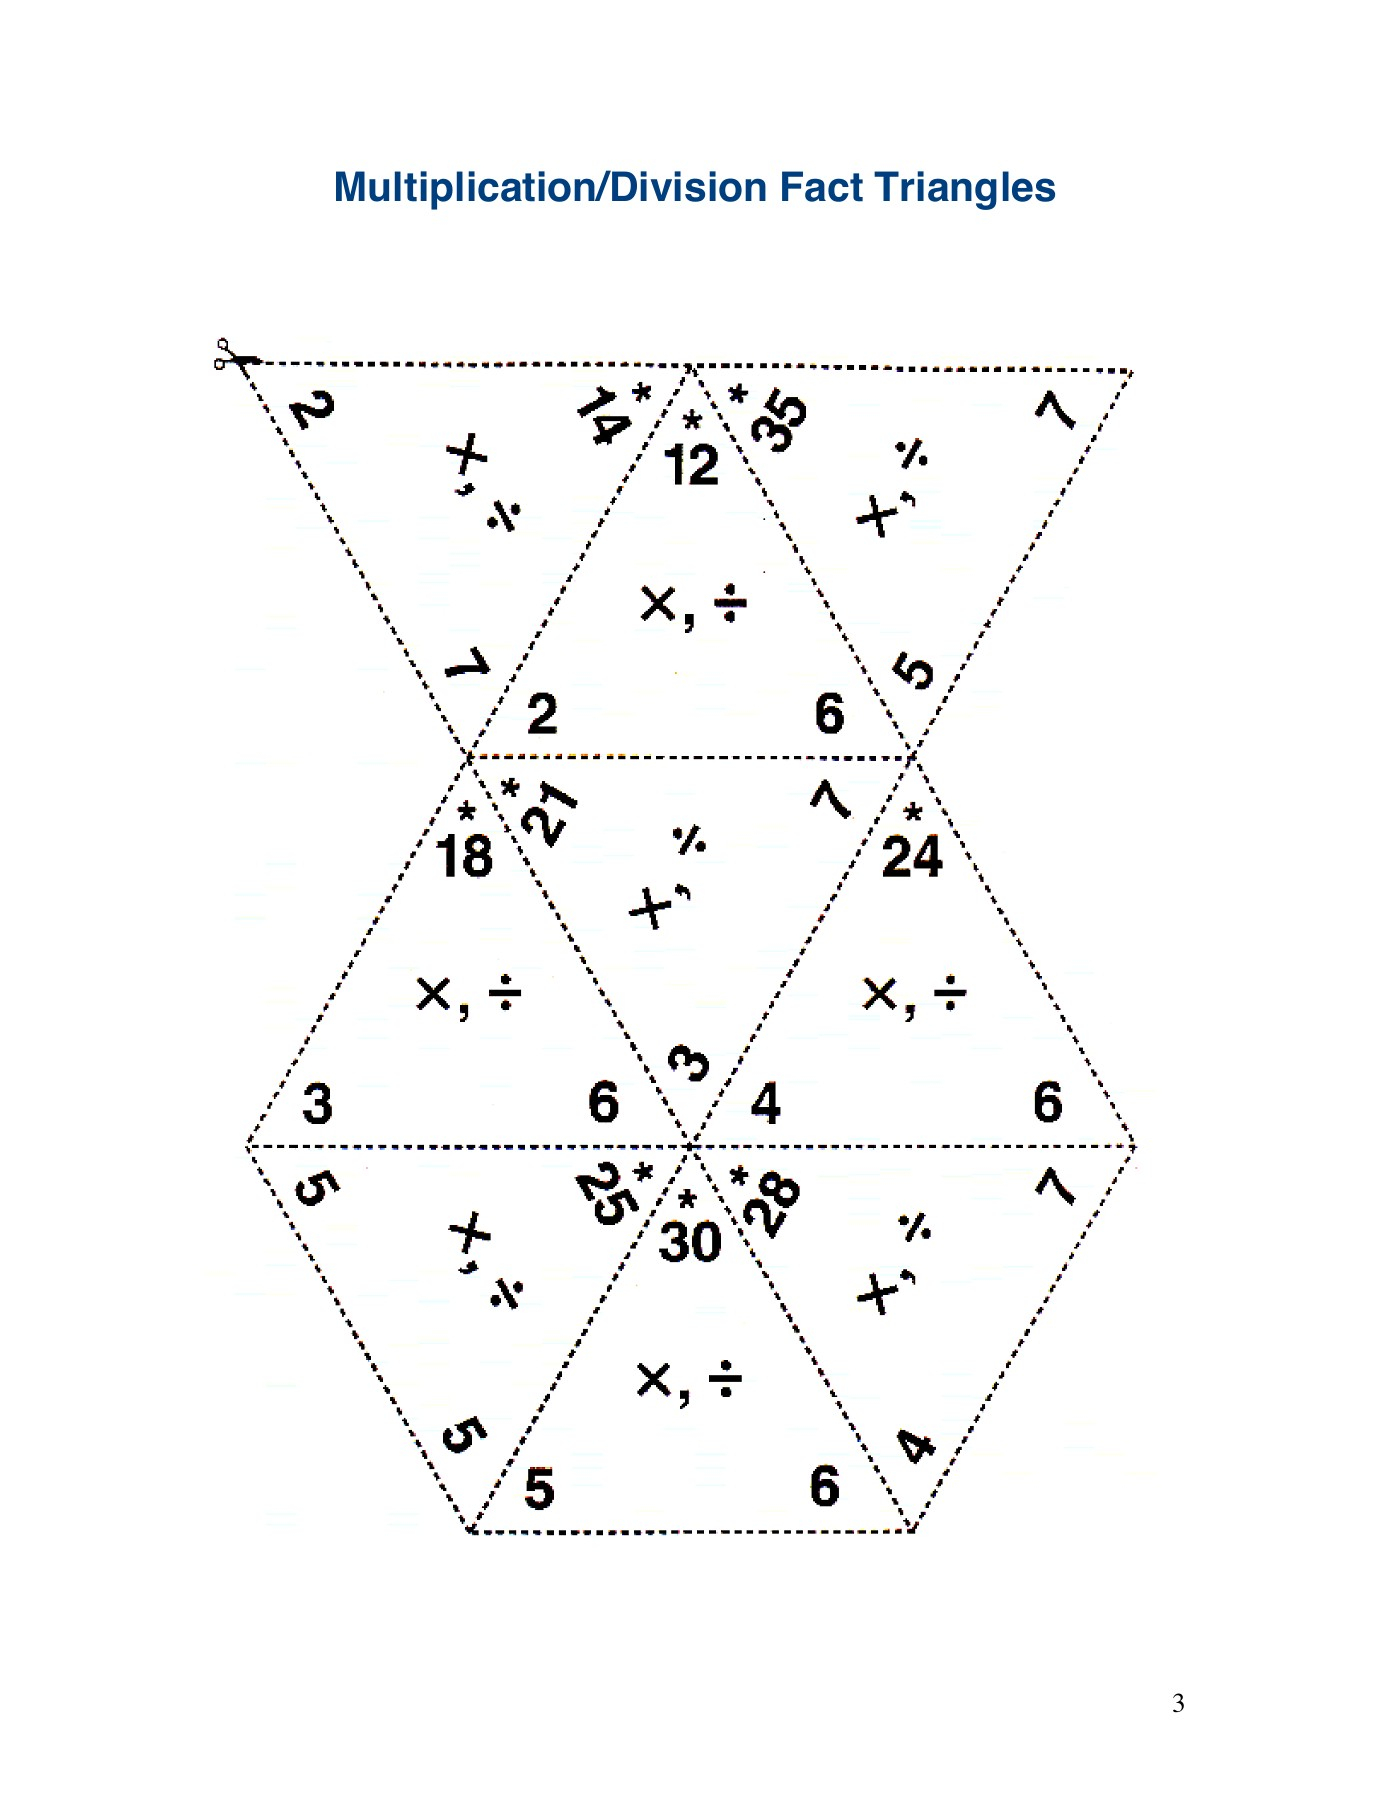 Multiplication/division Fact Triangles - Alycia Zimmerman